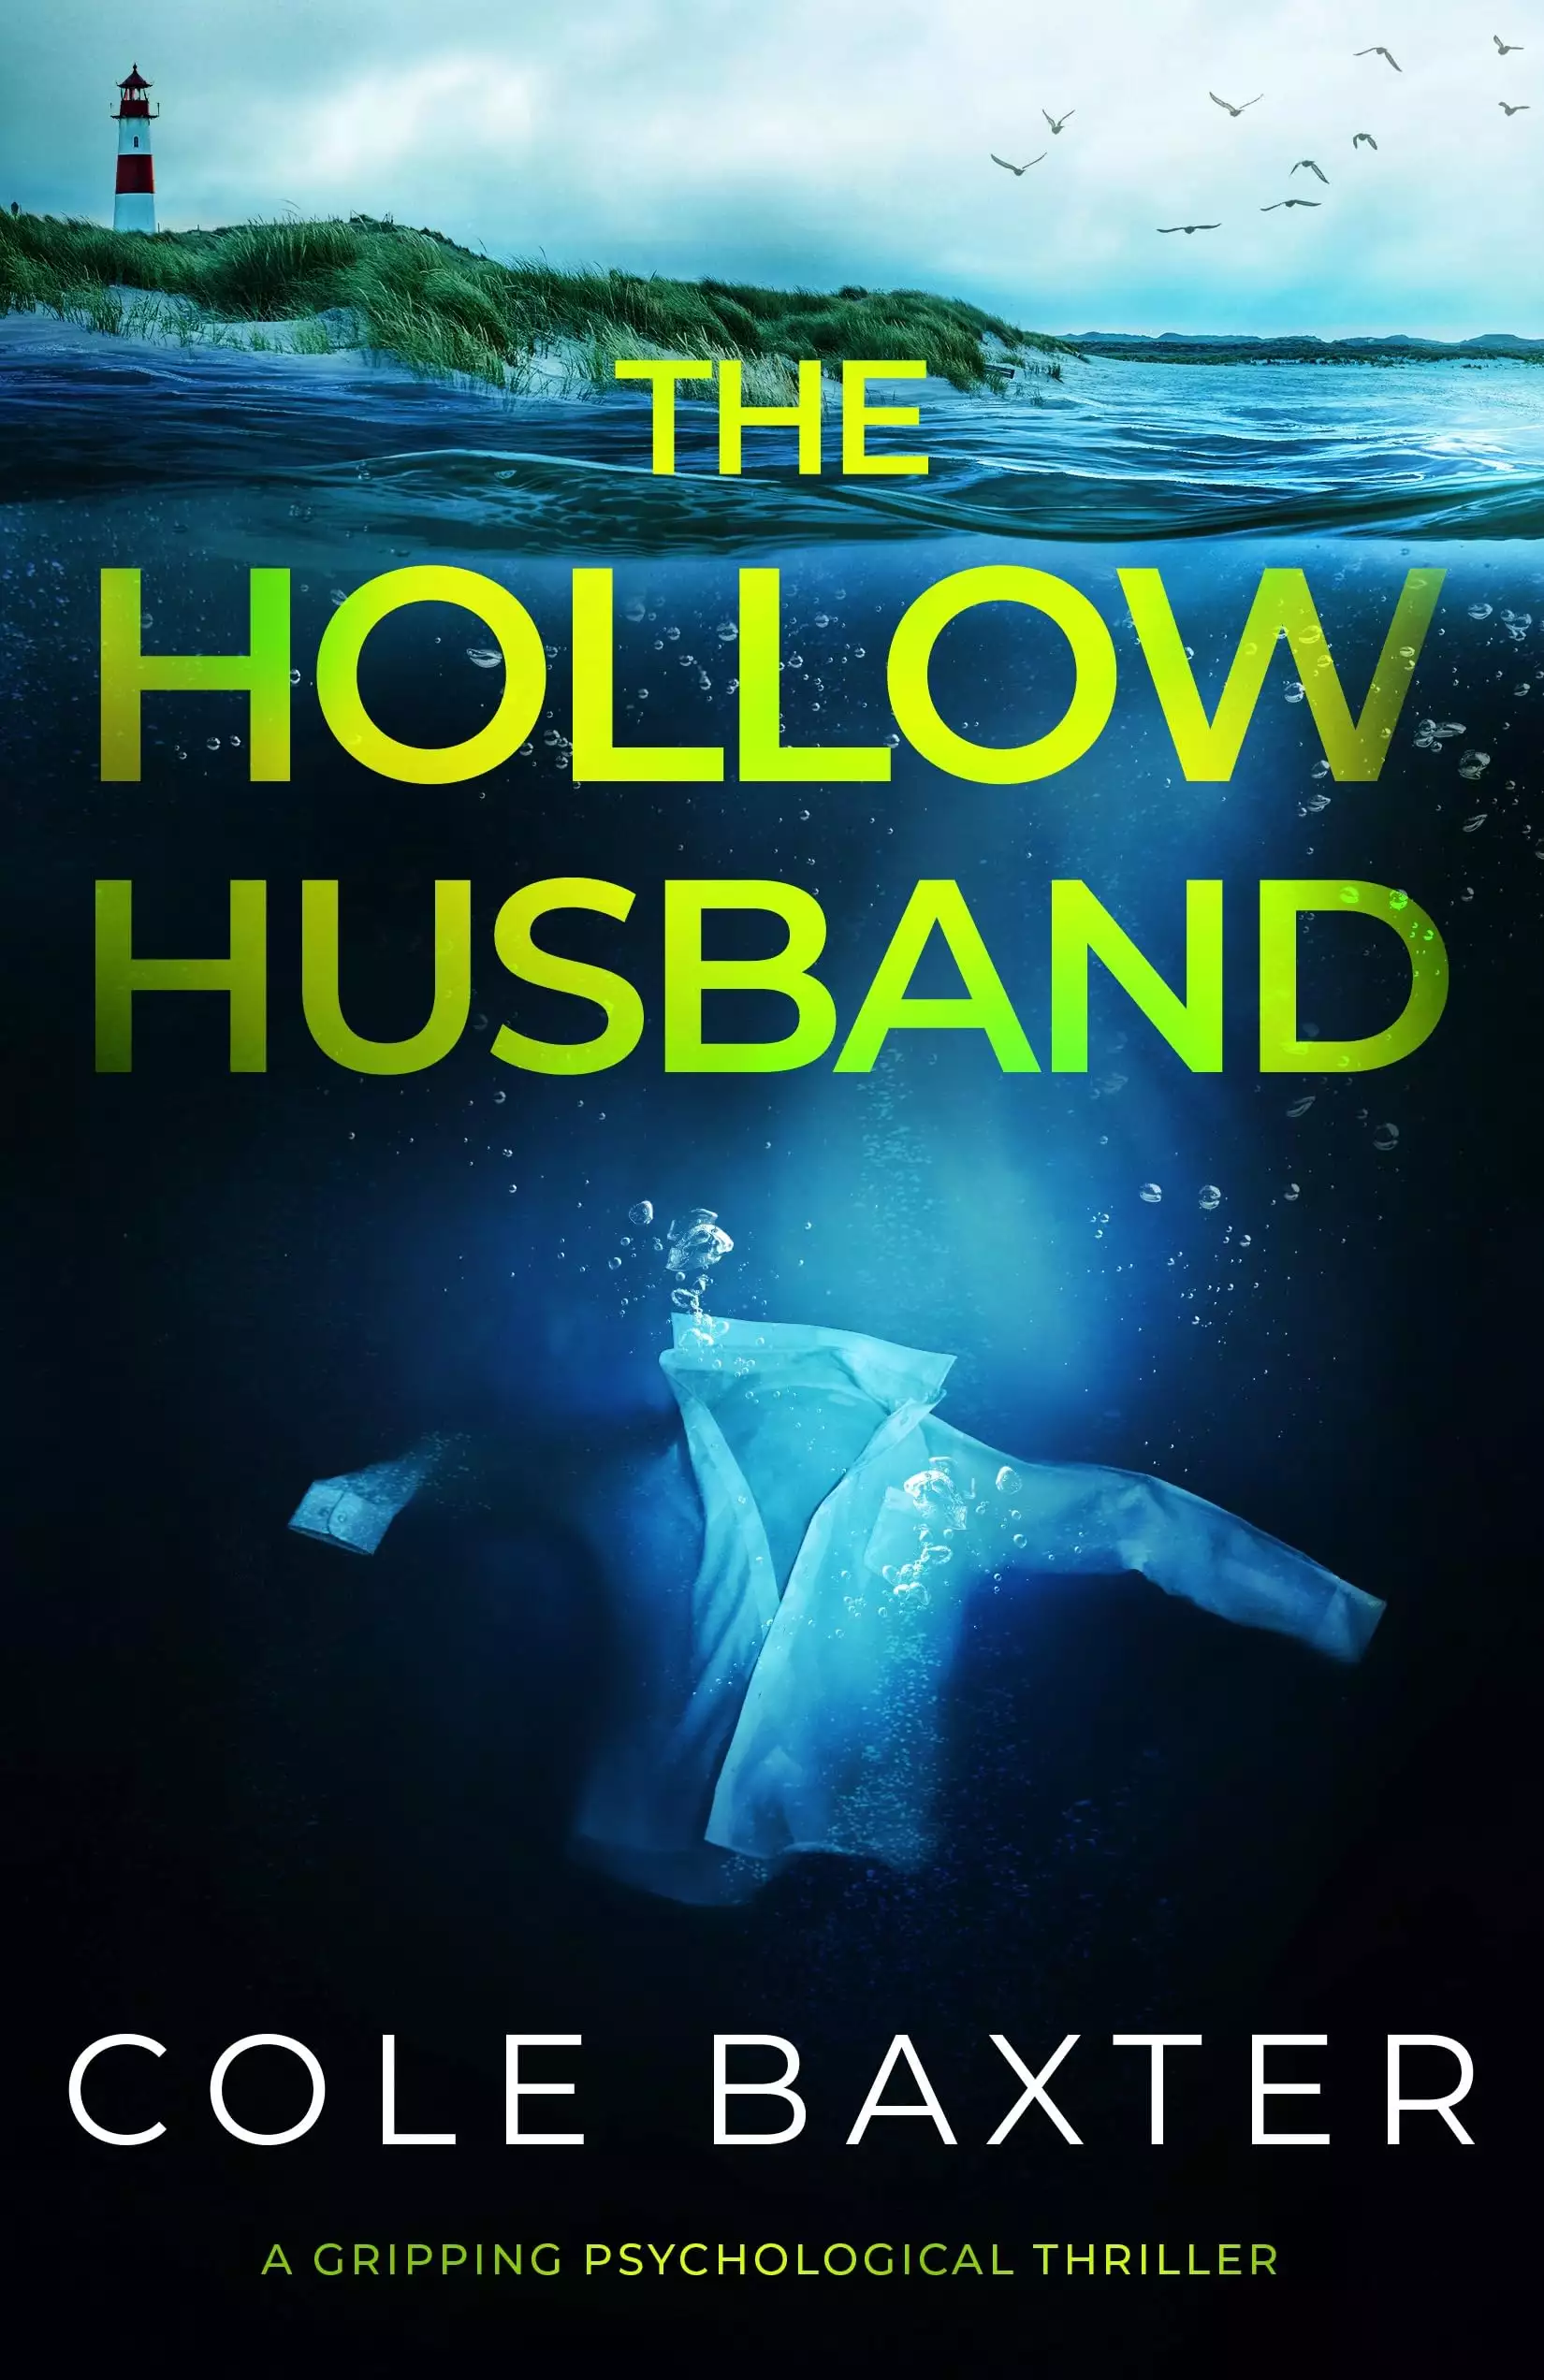 The Hollow Husband: a gripping psychological thriller